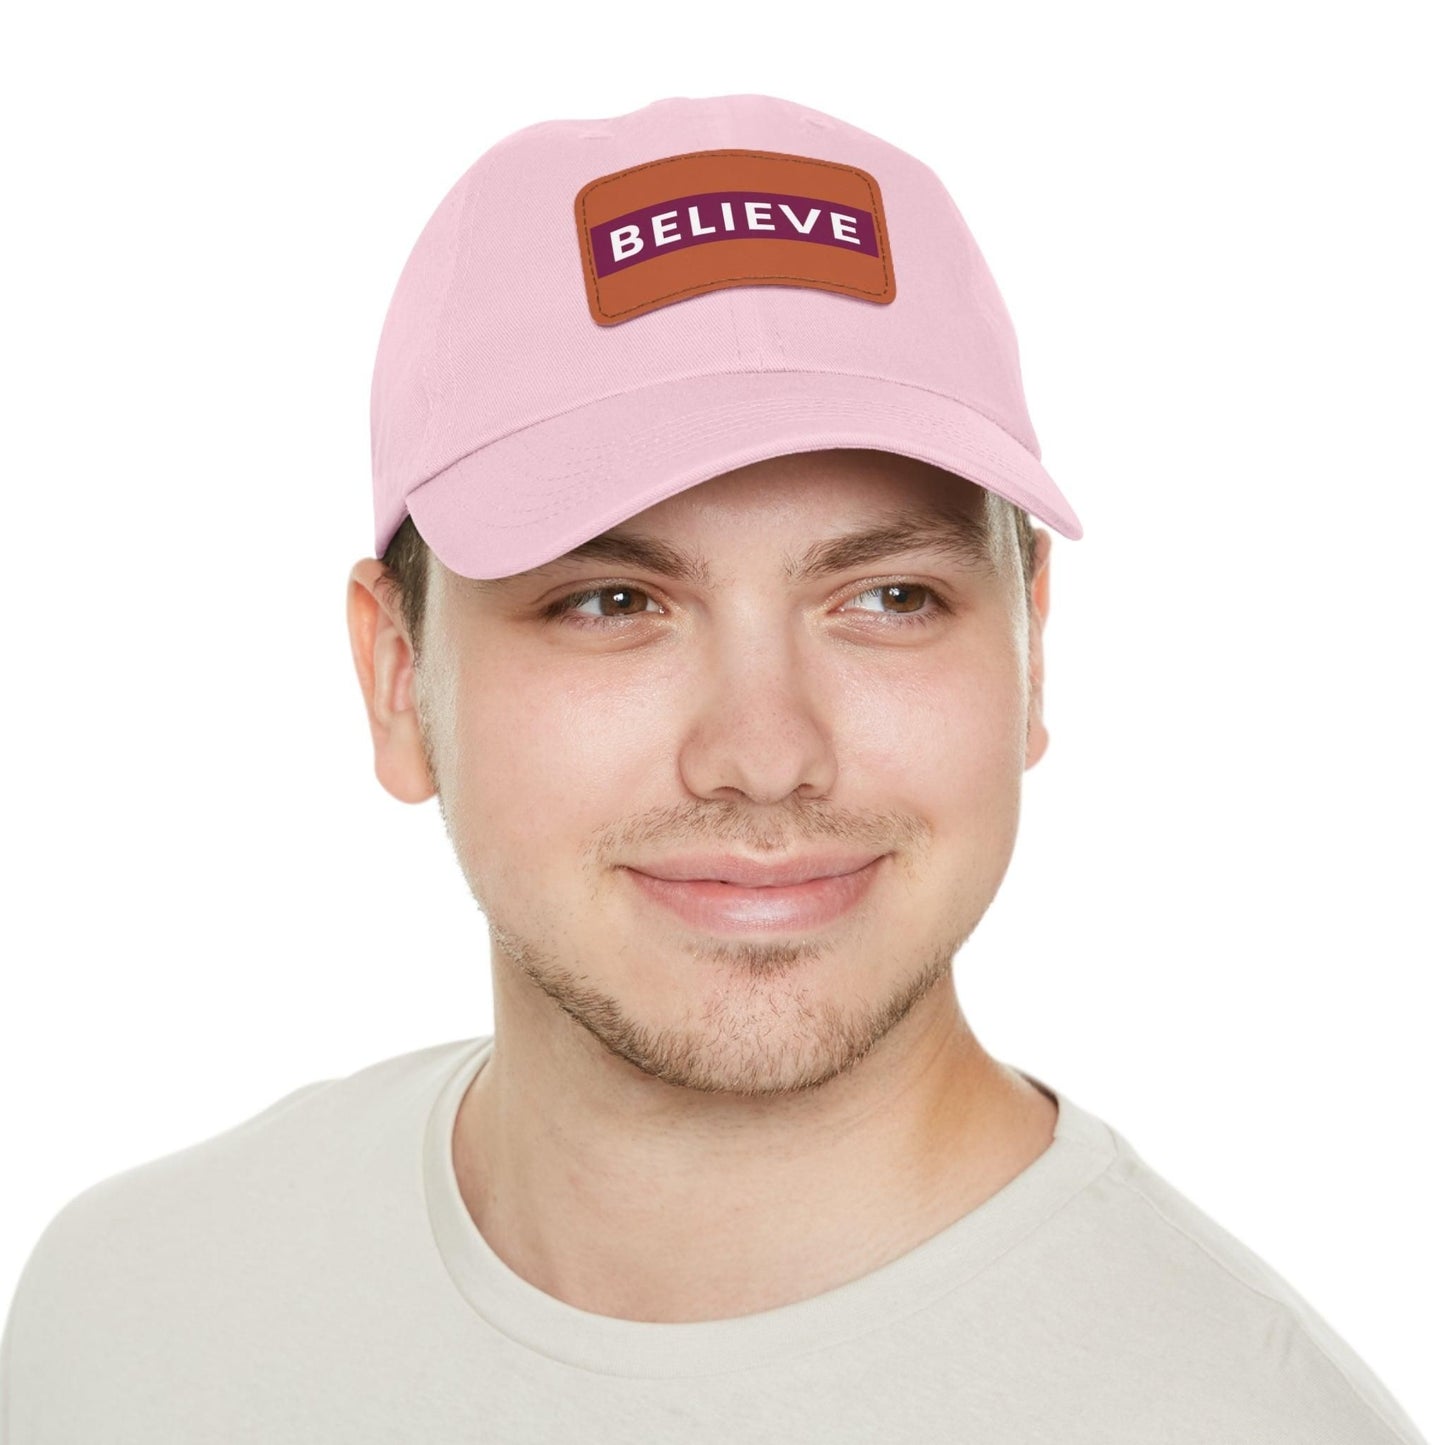 Believe Baseball Hat with Leather Patch Cap Light Pink / Light Brown patch Rectangle One size